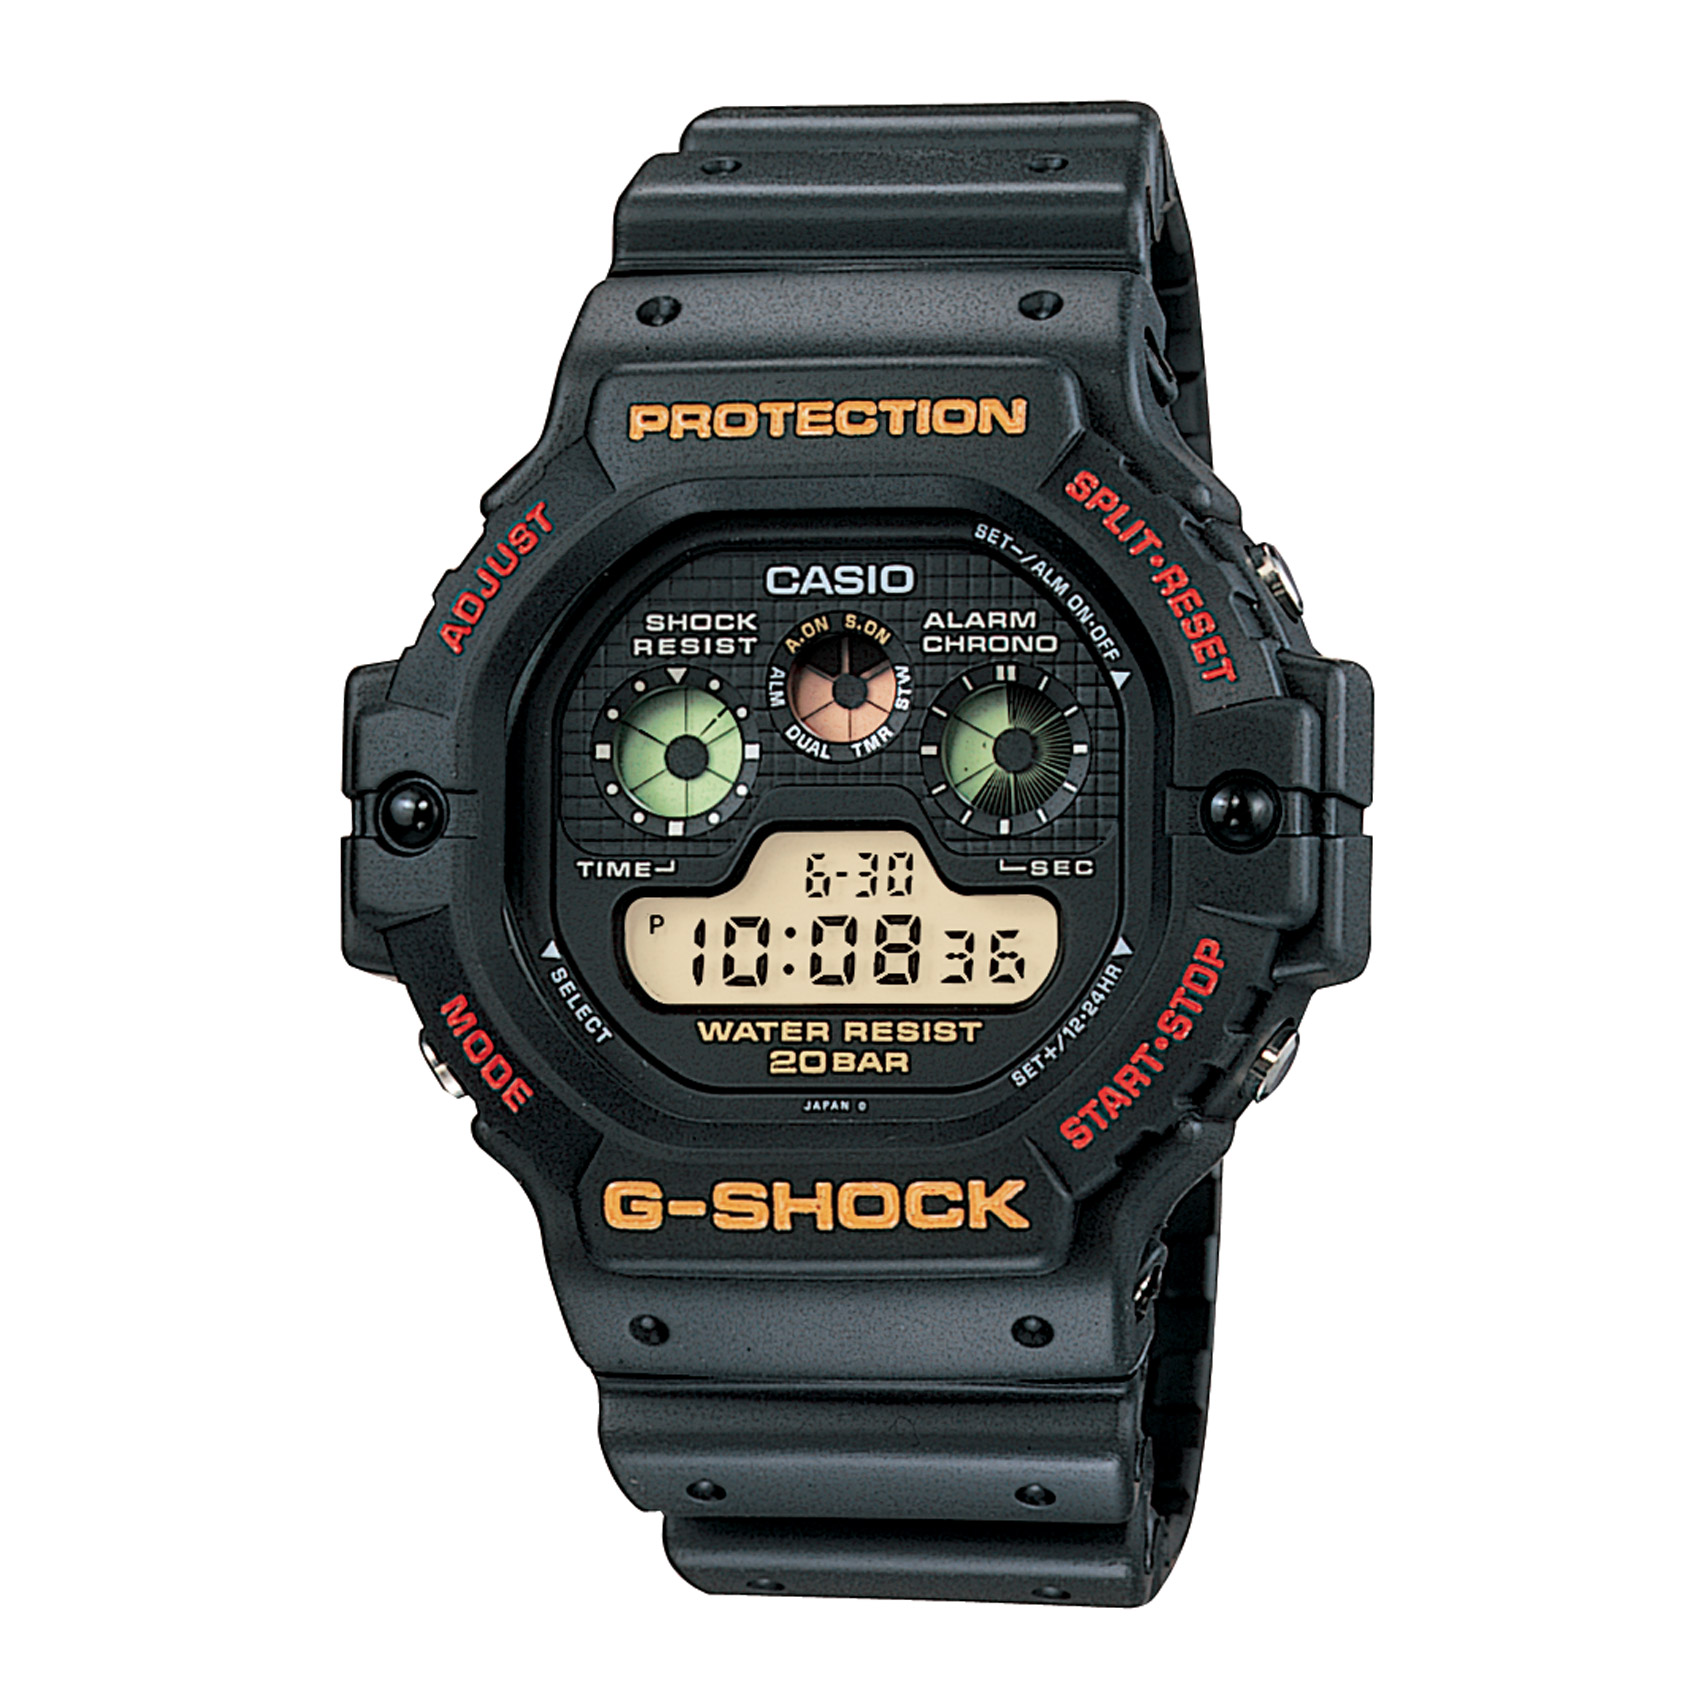 G-Shock experienced explosive sales in the 1990s, of pieces like the first strong resin digital watch